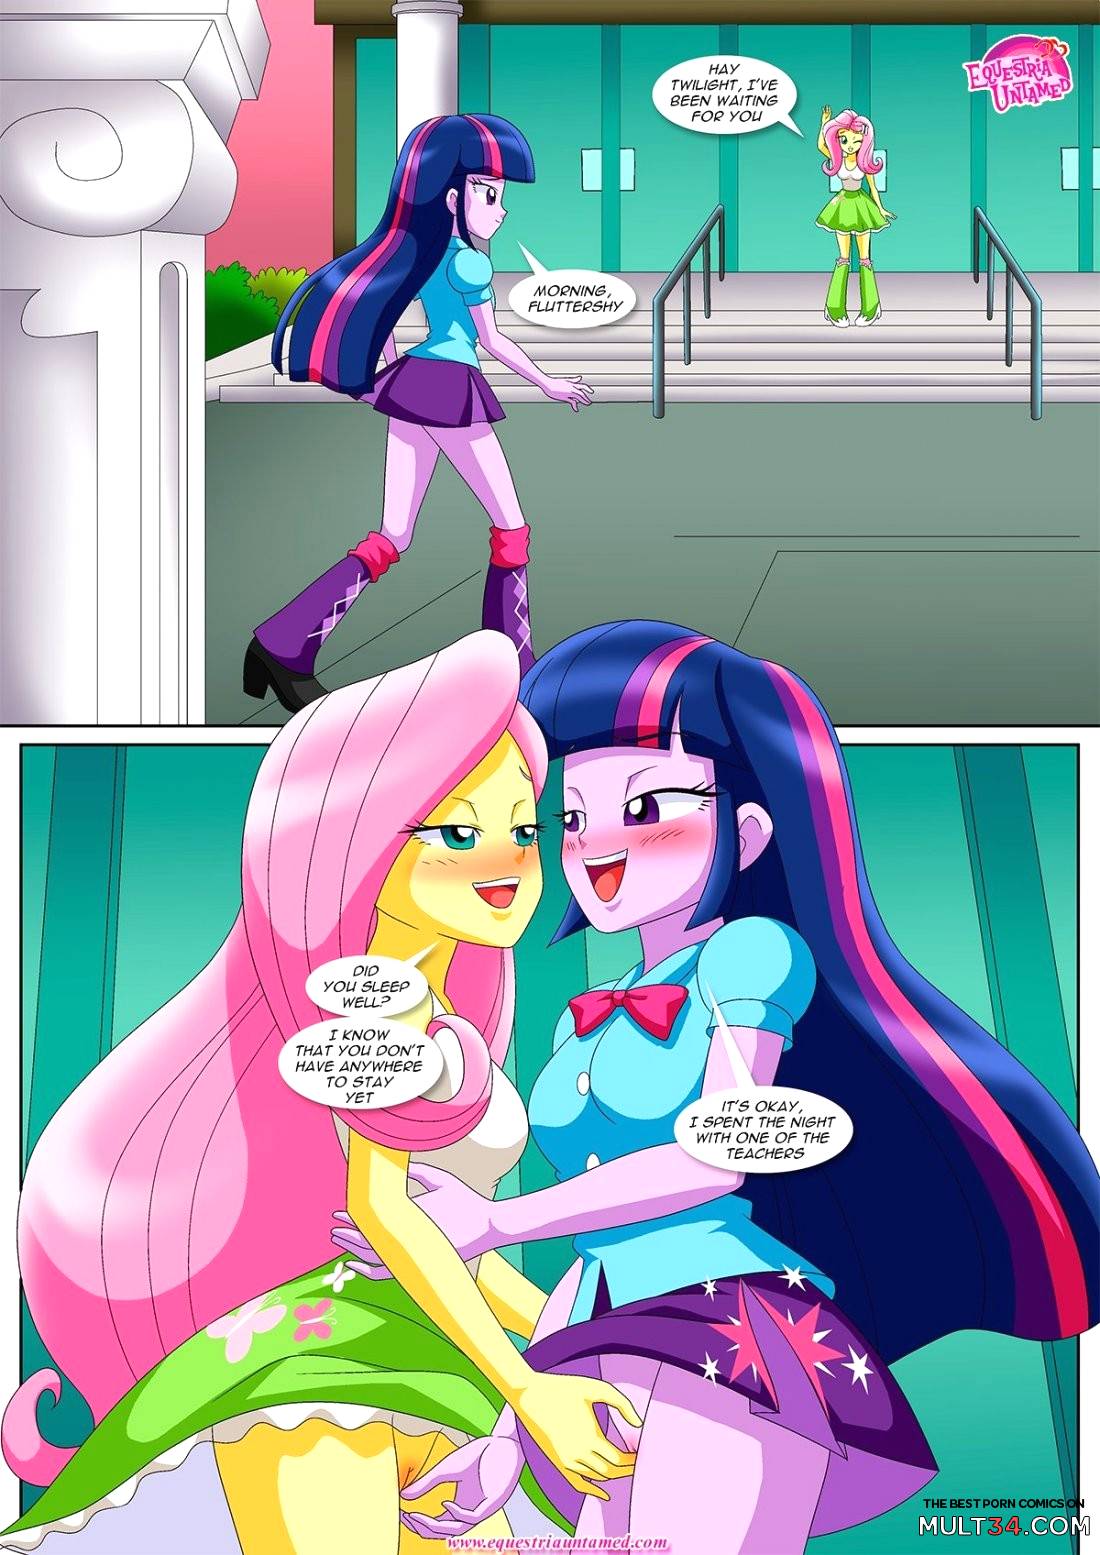 Equestria girls unleashed 2 page 2